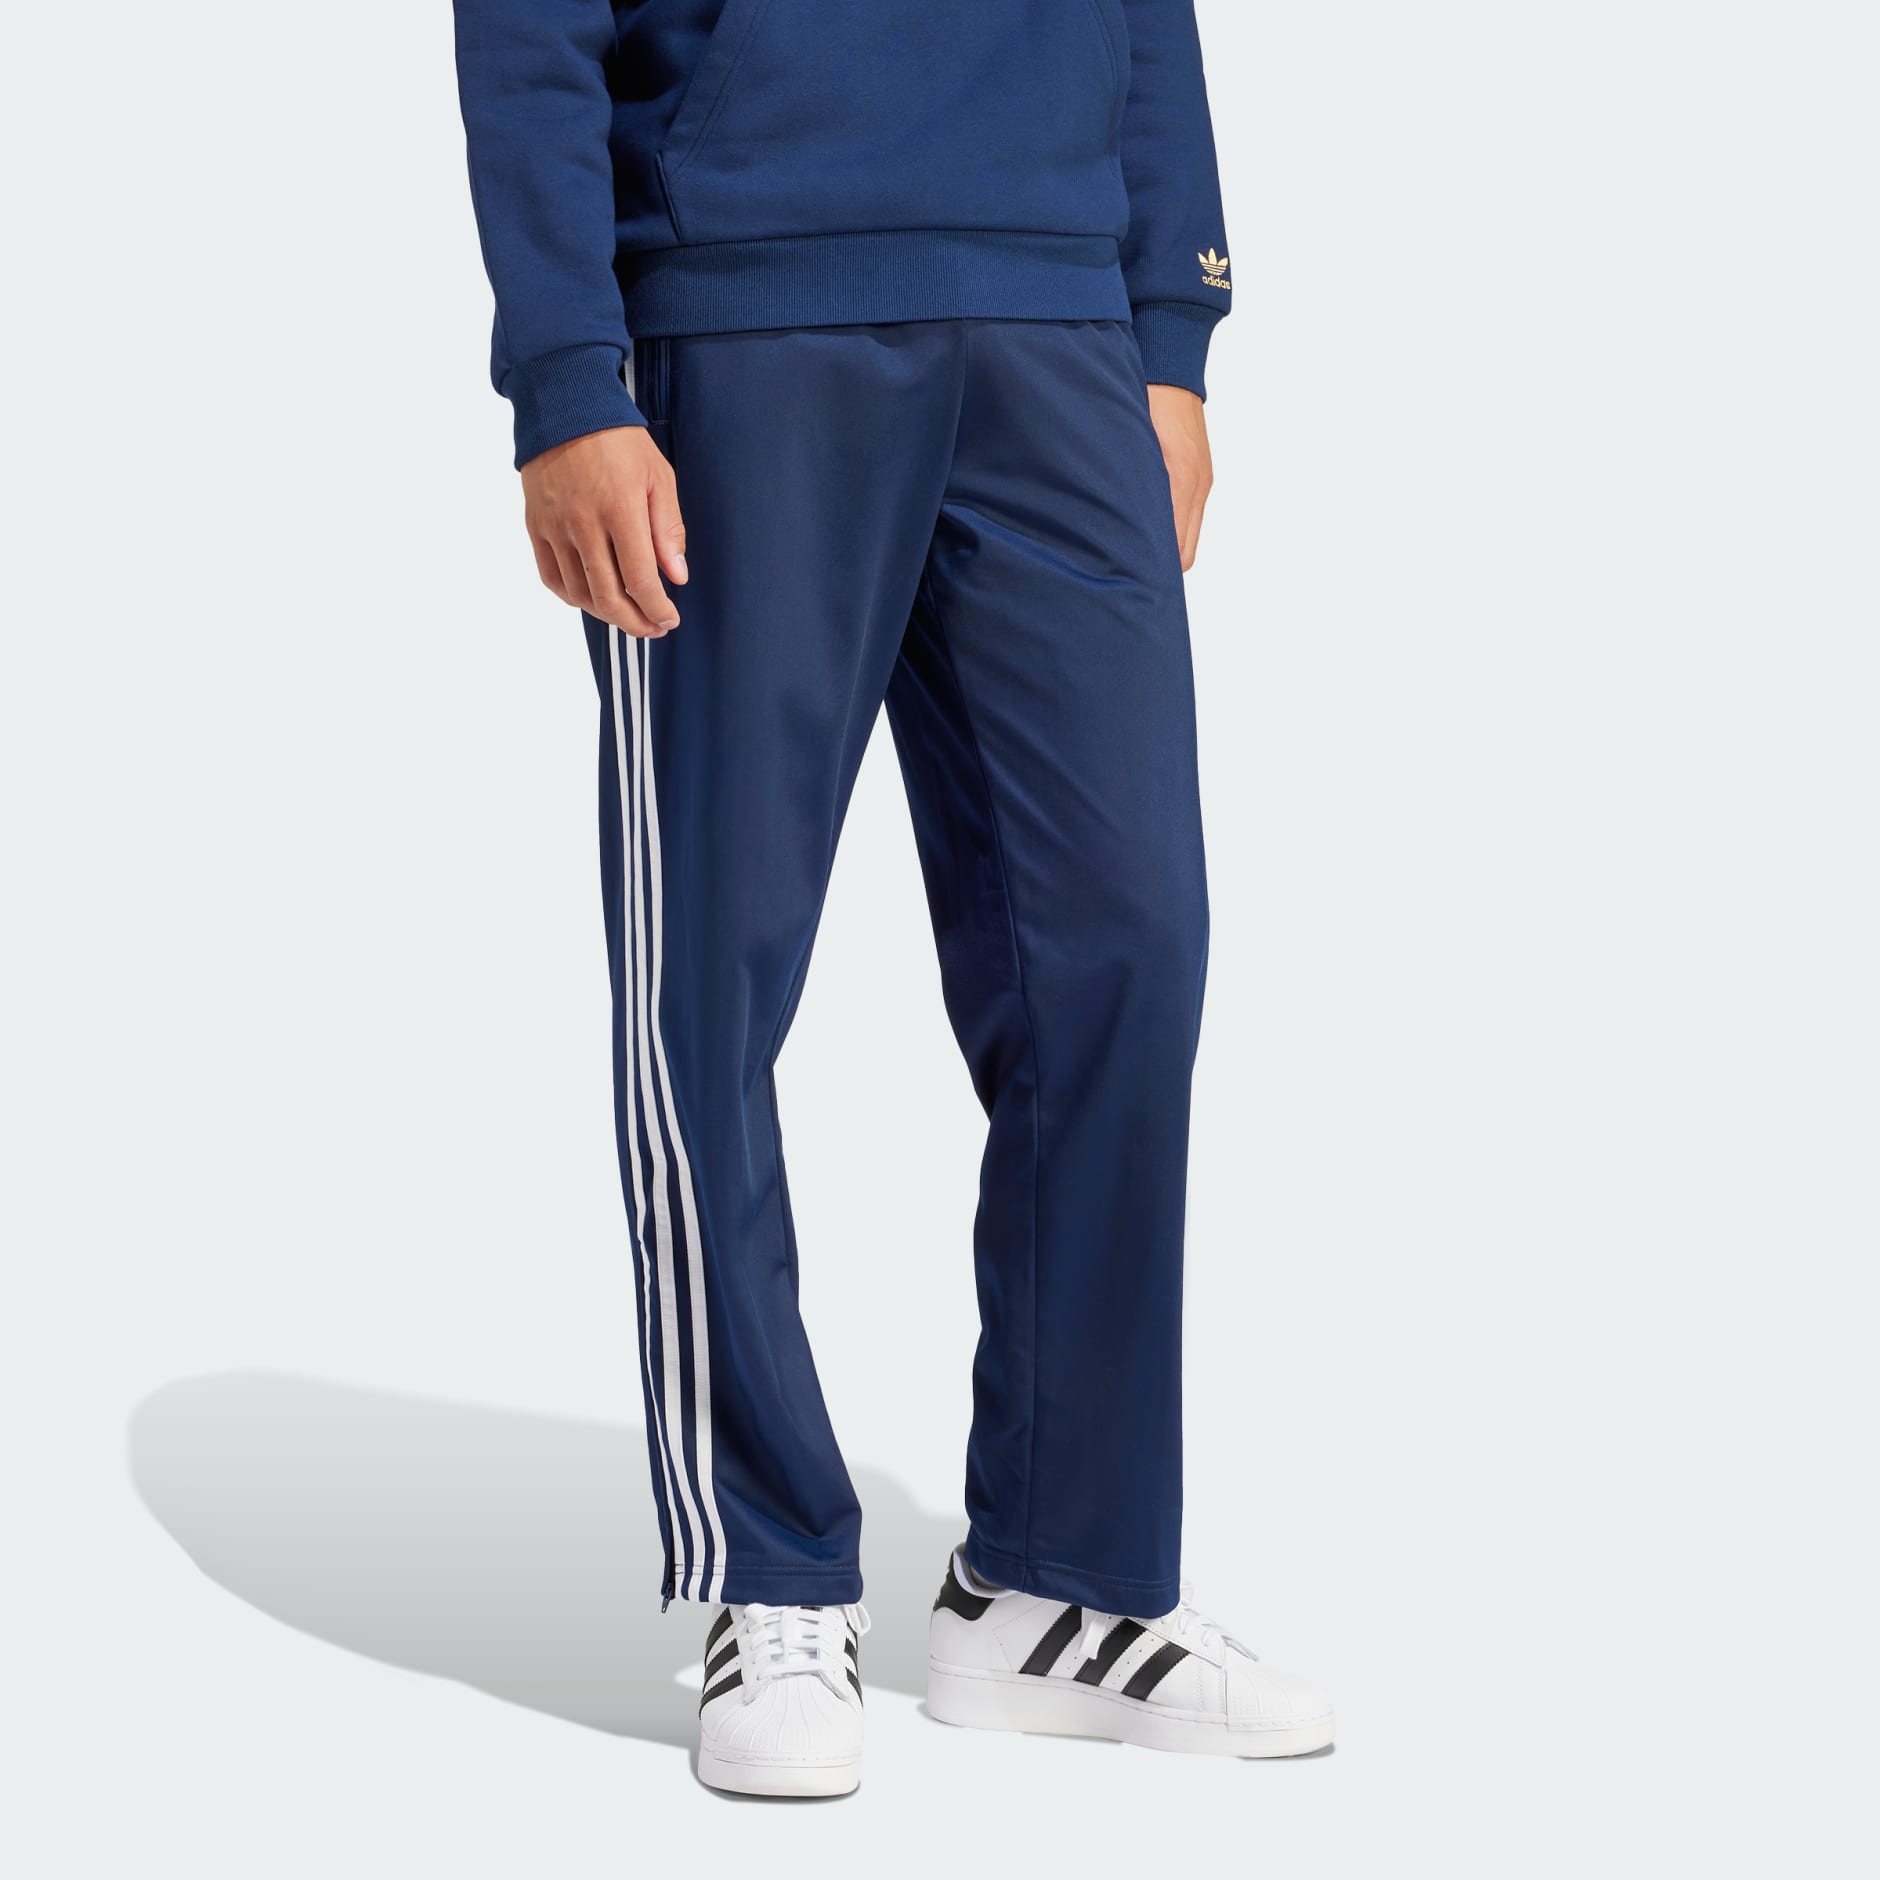 Adidas Firebird Track Jacket + Track Pants REVIEW - YouTube